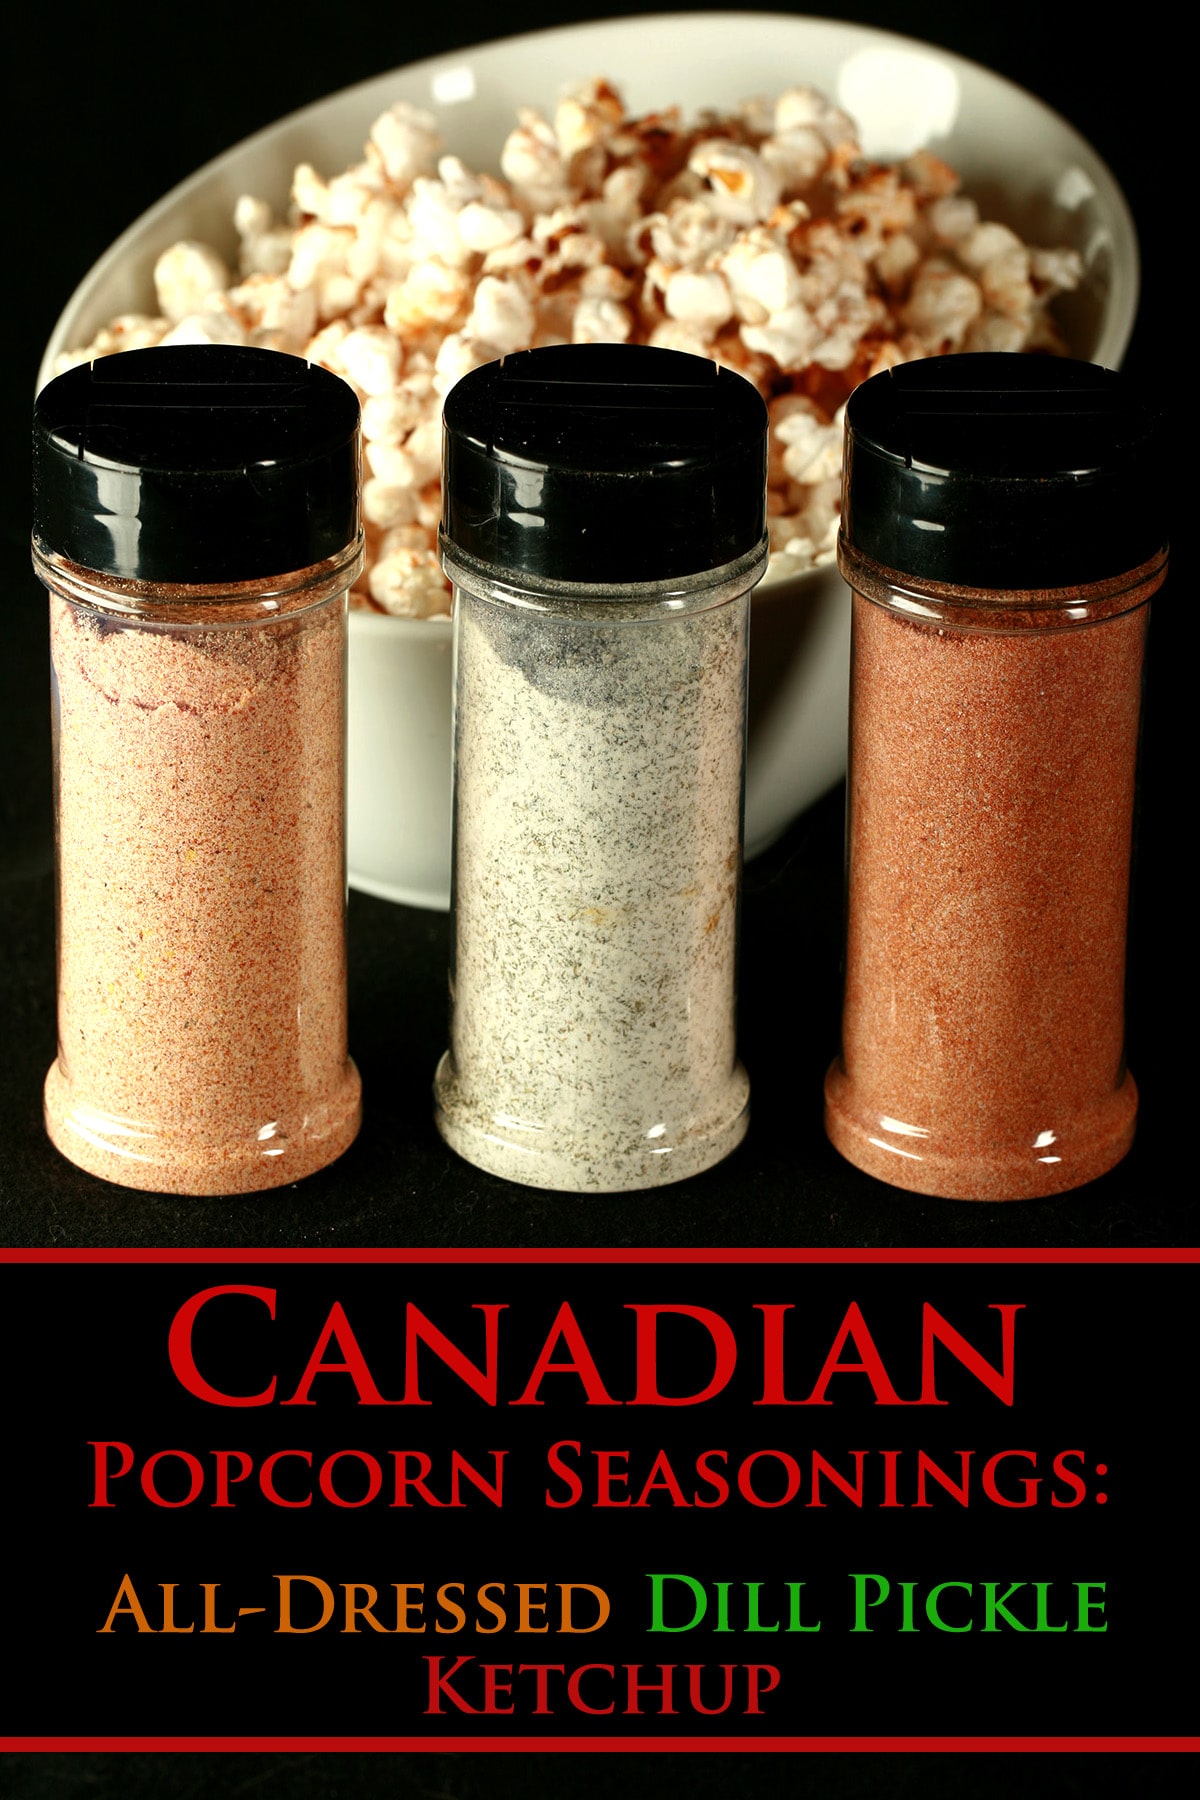 3 small canisters of popcorn seasoning - All Dressed, Dill Pickle, and Ketchup - are lined up in front of a large white bowl of seasoned popcorn.